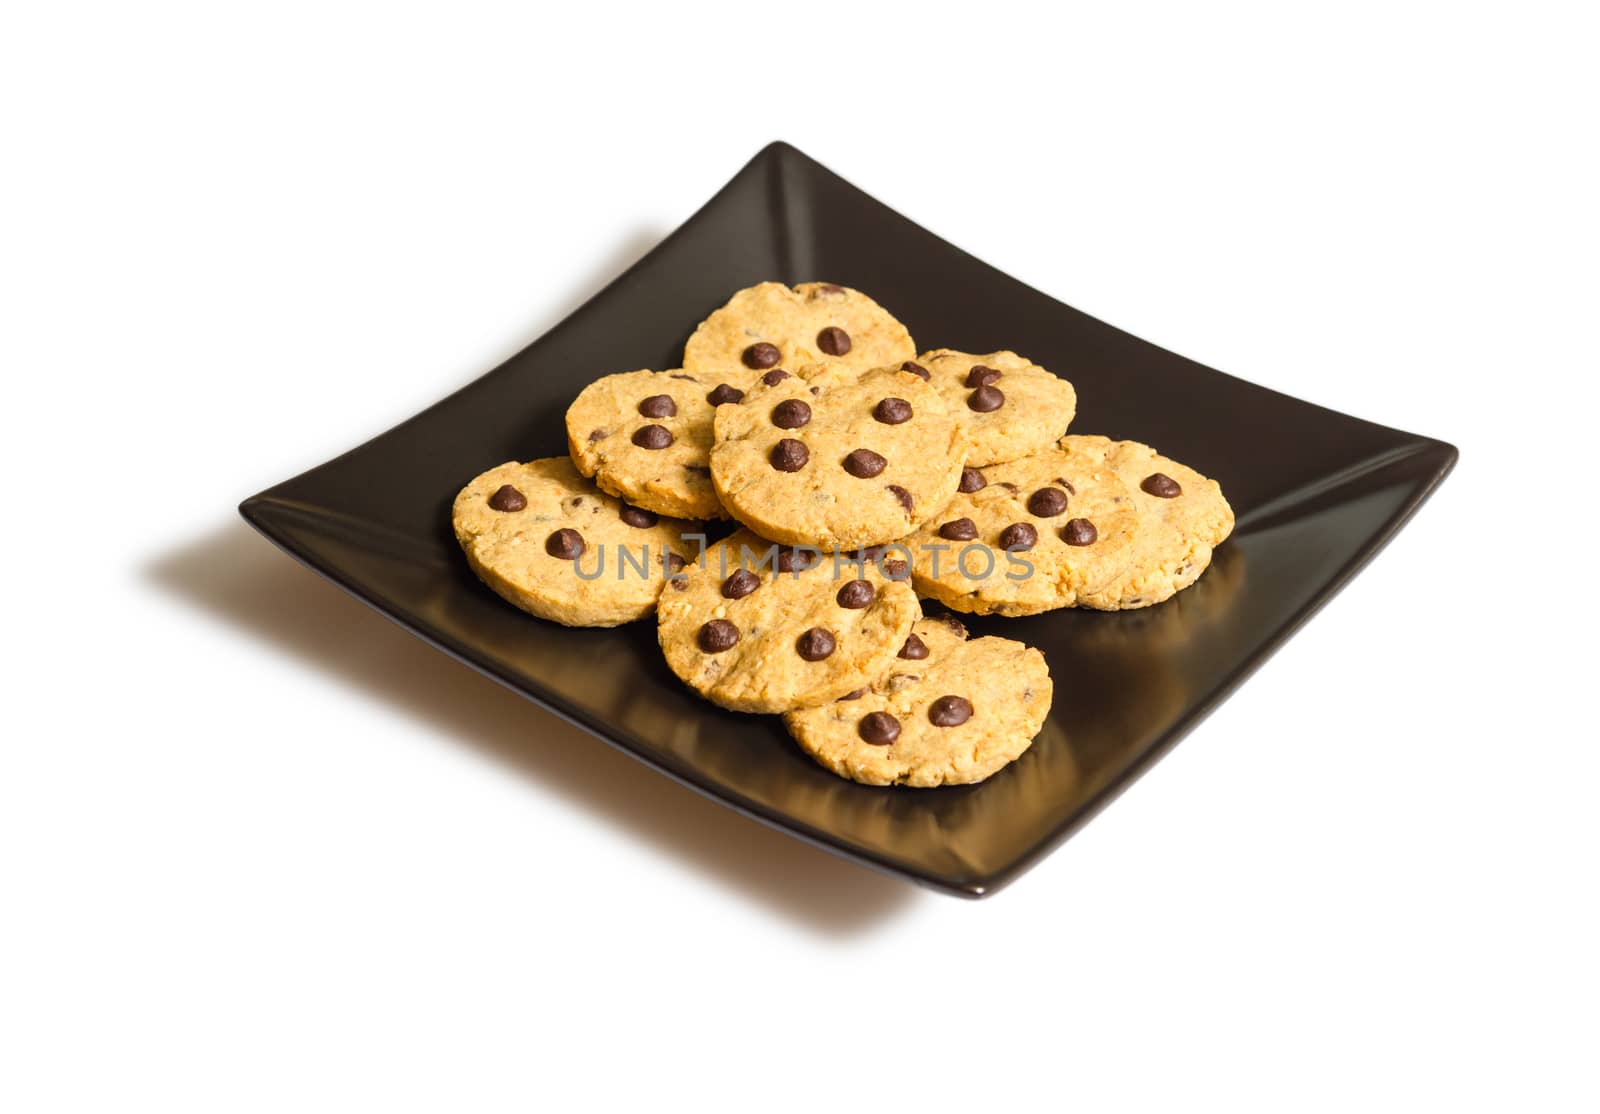 Chocolate chip cookies on a black plate by doble.d